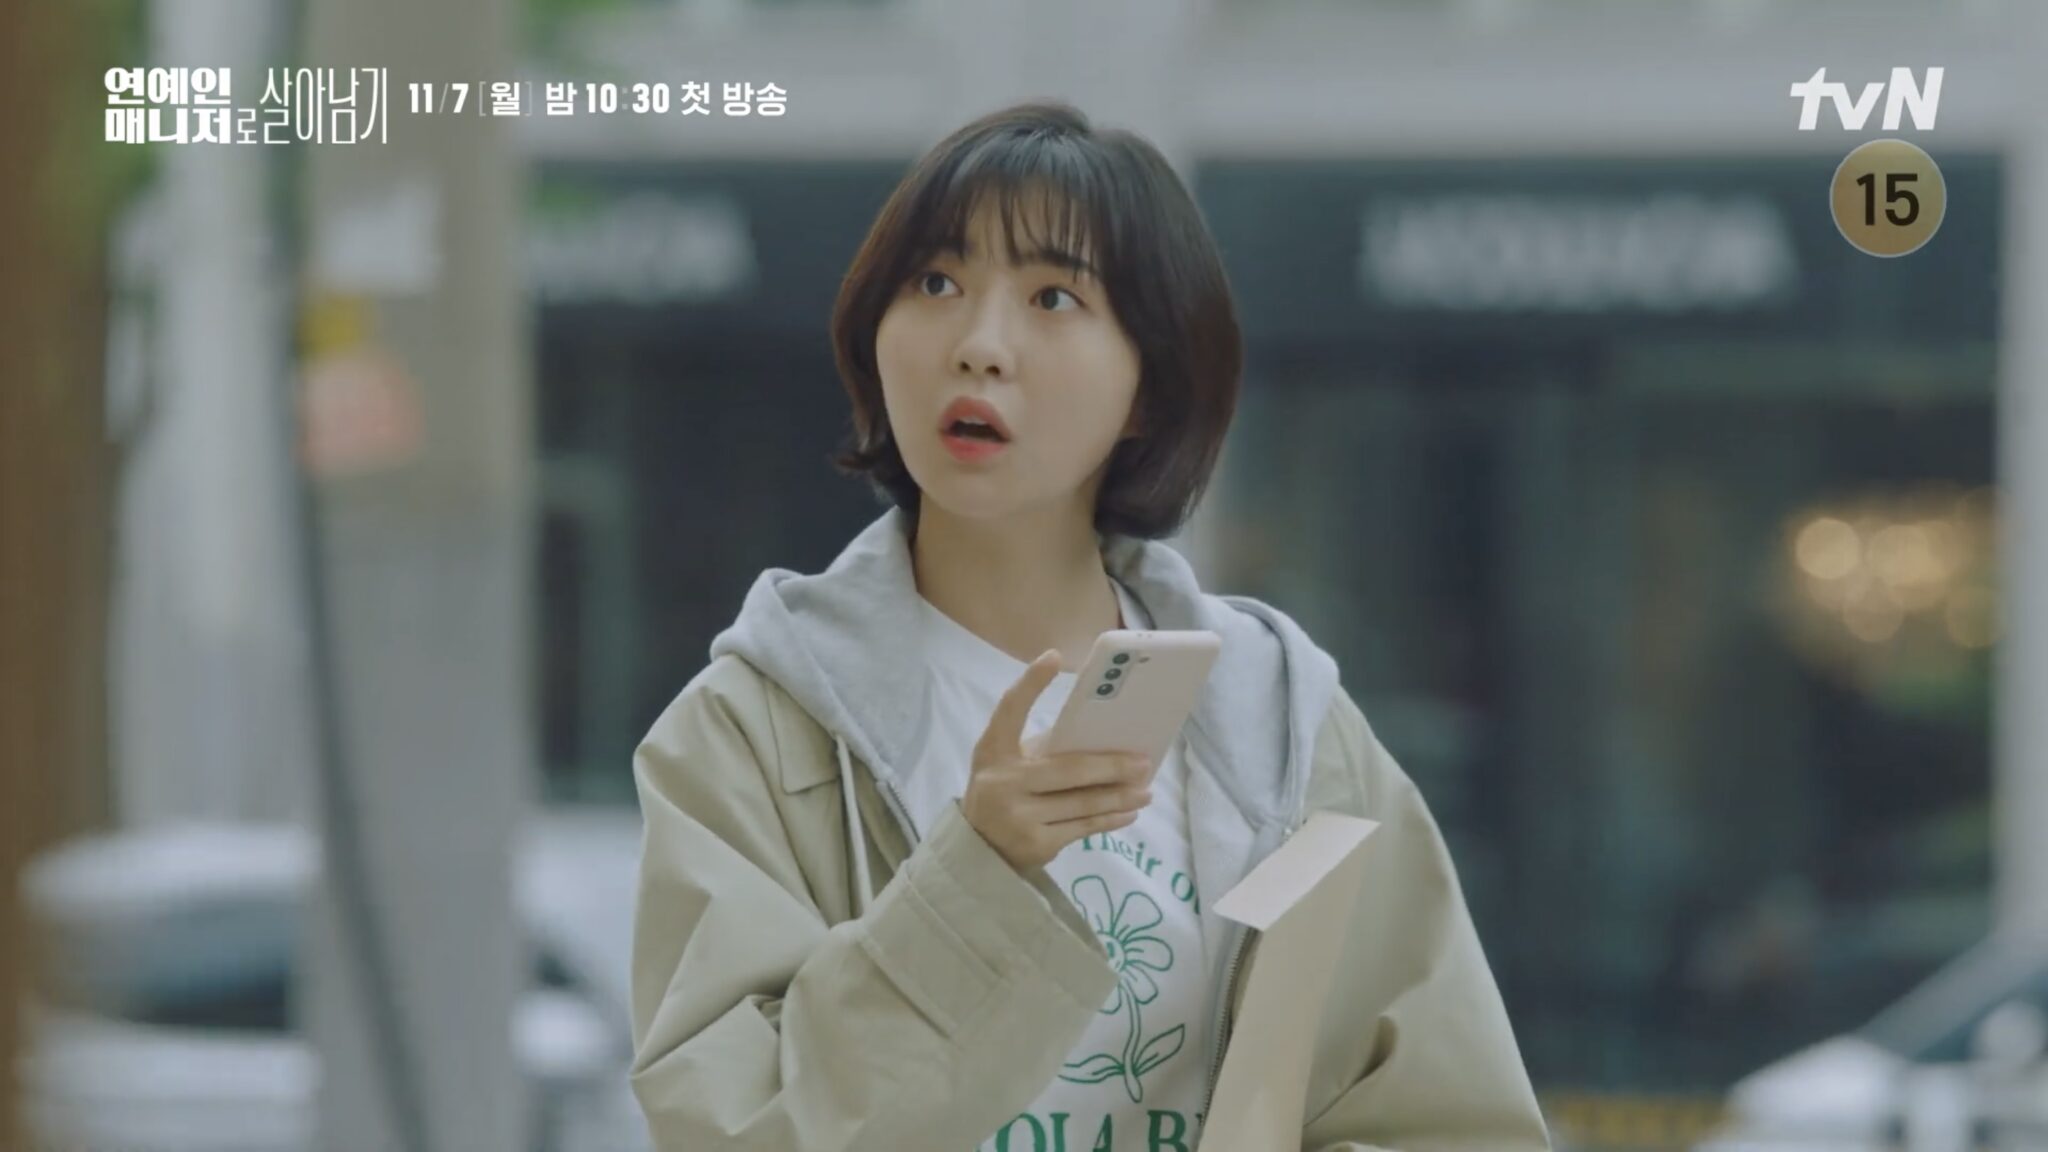 A glimpse into the hard work Behind Every Star in tvN’s latest teaser